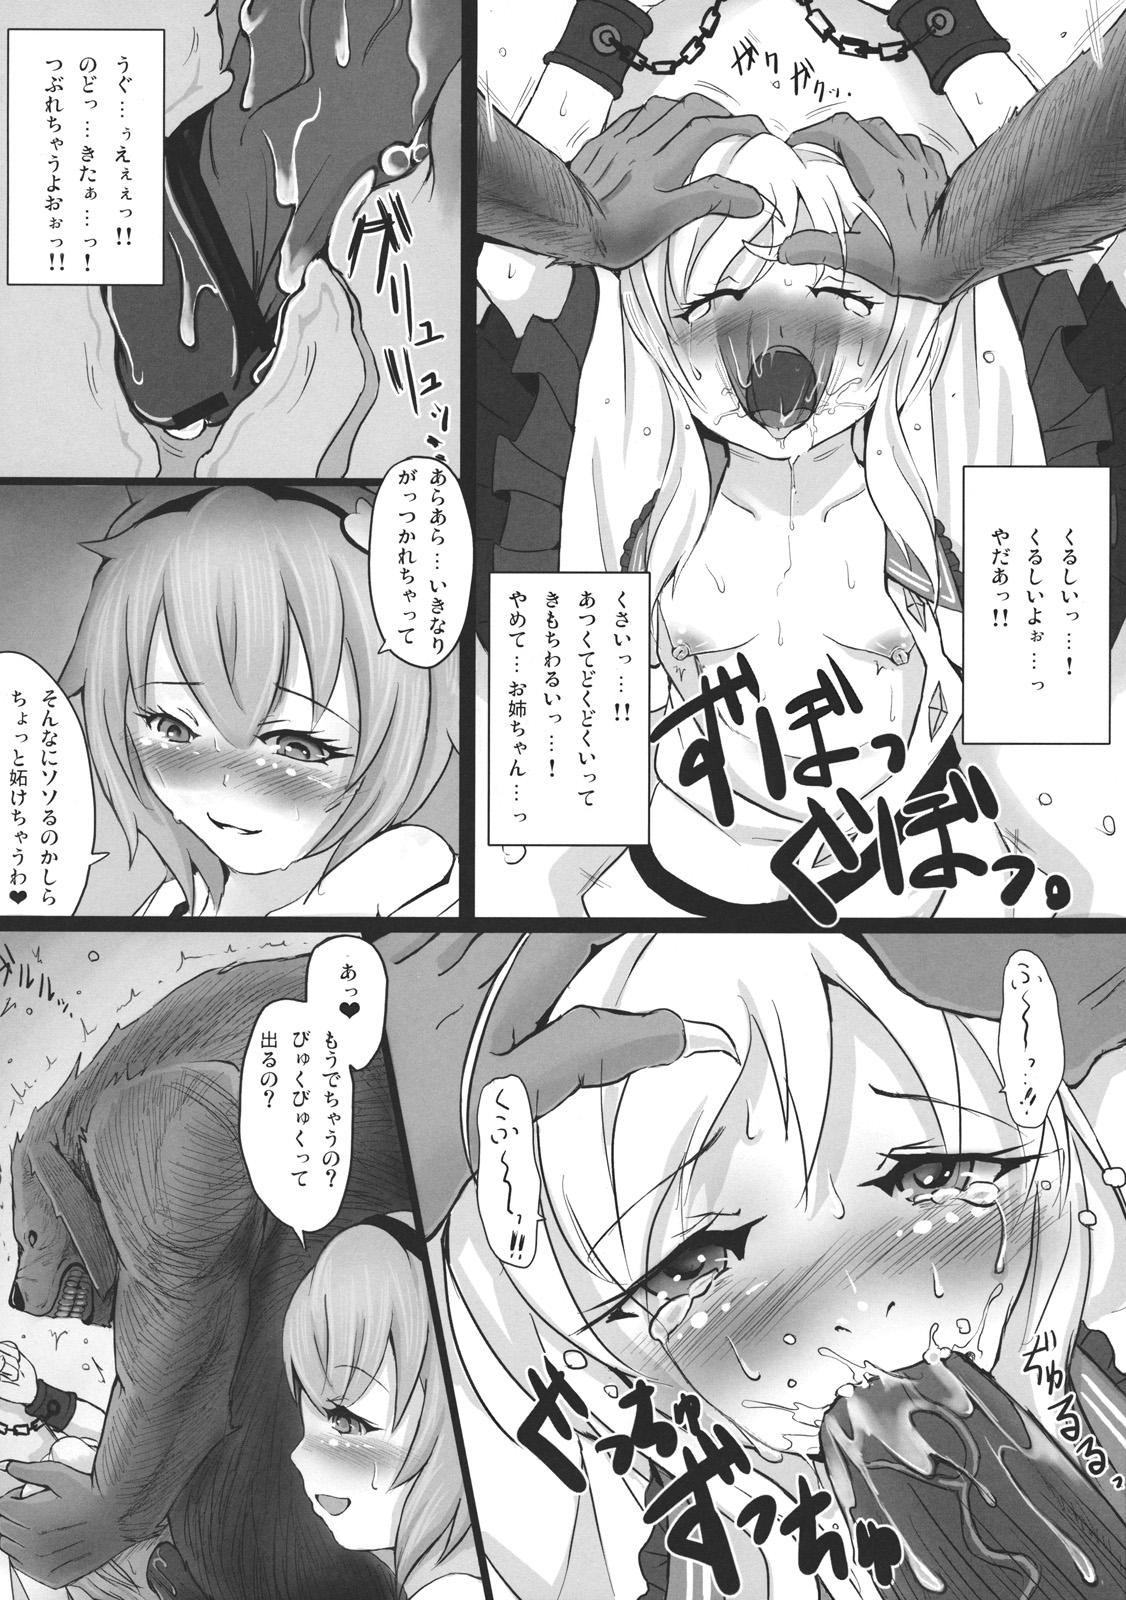 Oldvsyoung TRAUMATIZE - Touhou project Solo - Page 12